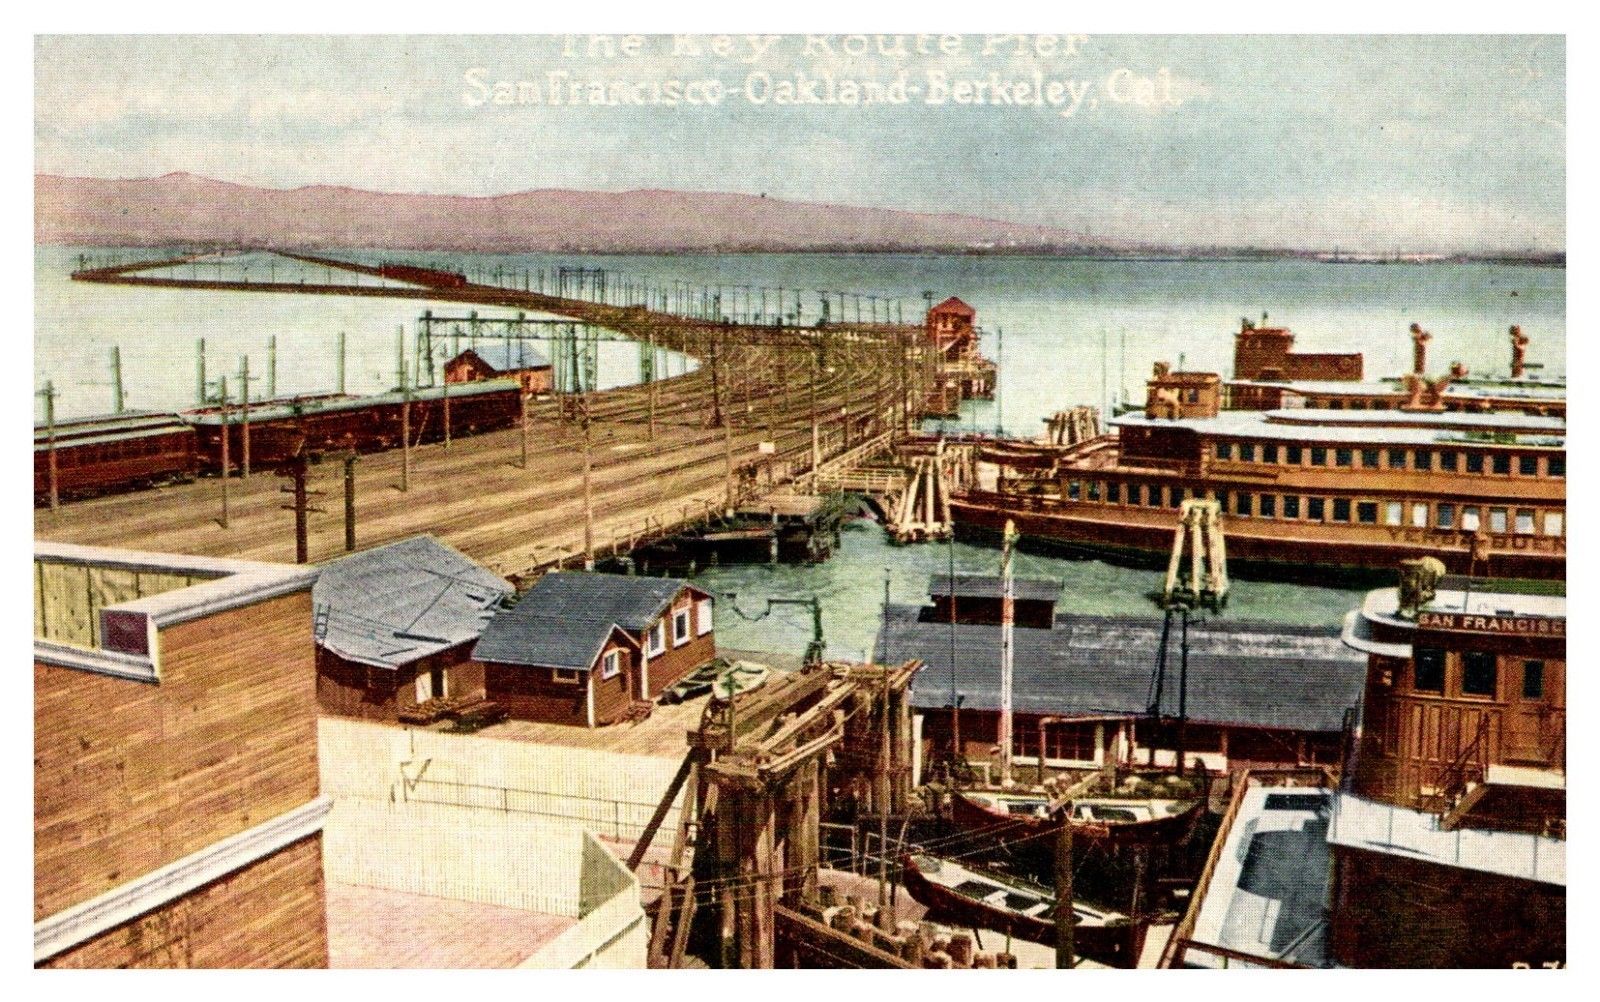 A color drawing shows ferries and other boats out in the Bay with a long stretch of rail tracks connecting back to the mainland.